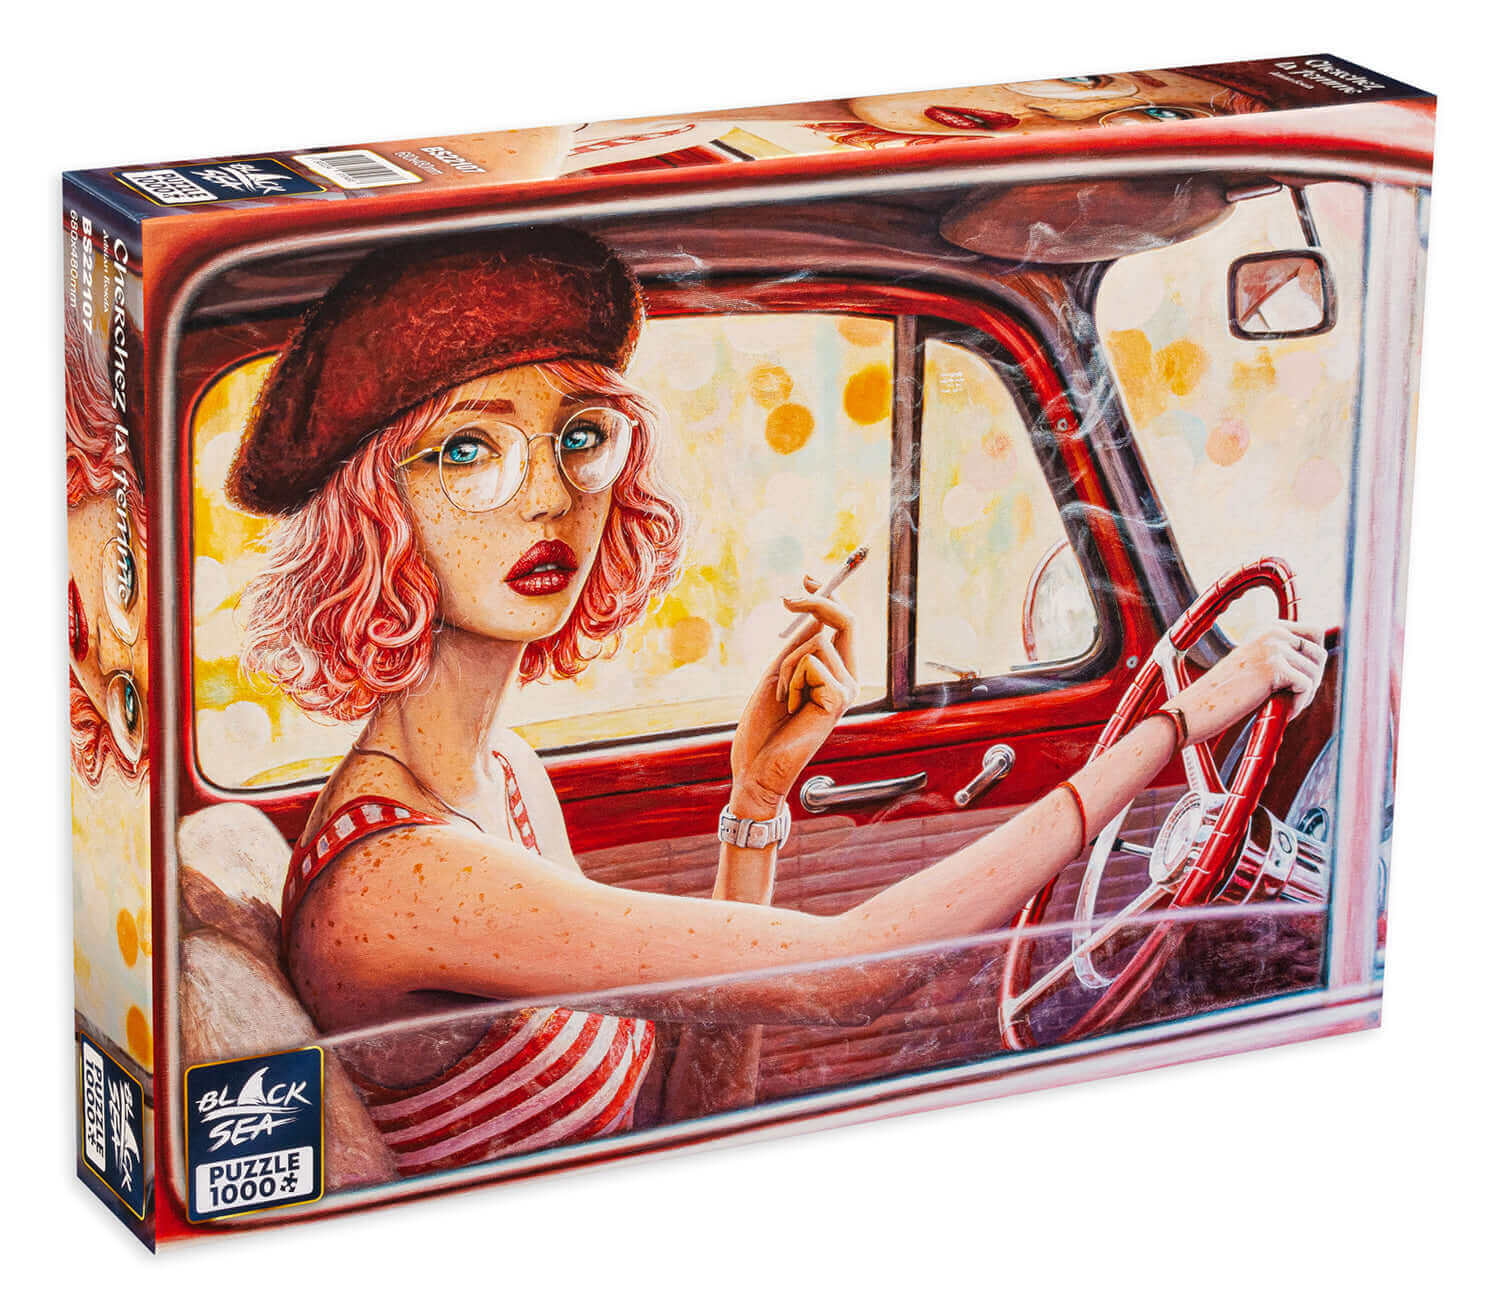 Puzzle Black Sea 1000 pieces - Cherchez la femme, Delicate and tender as a porcelain doll, the woman in pink keeps her secrets well. Her eyes, however, glow with confidence and power that help her achieve anything and everything. She is a true adventurer,